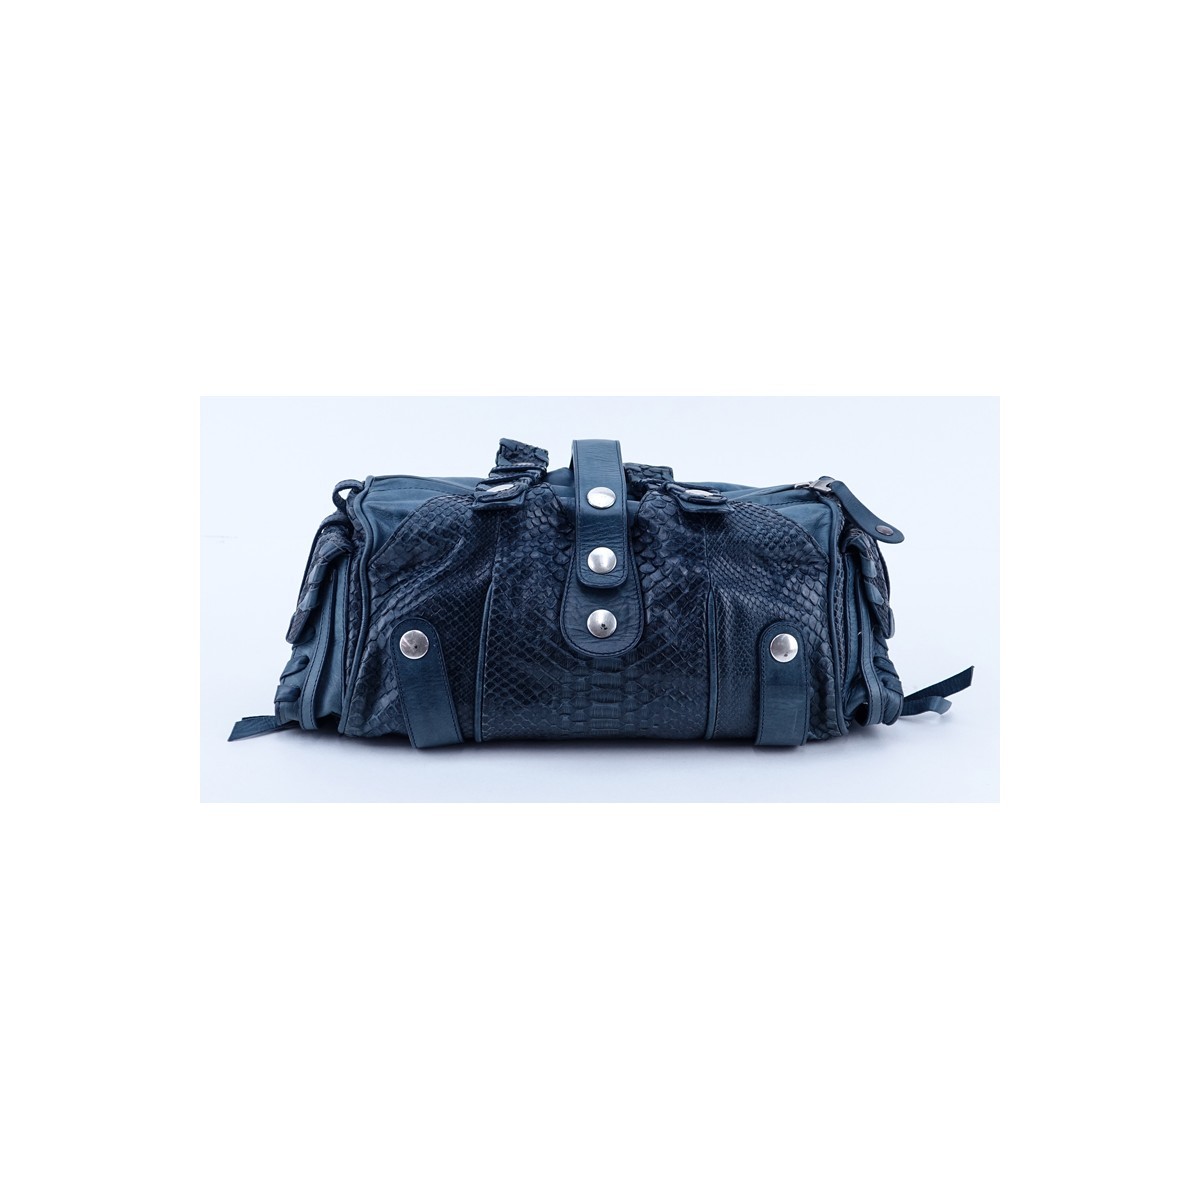 Chloe Petrol Blue Python And Leather Silverado PM Handbag. Brushed silver tone hardware, beige canvas interior with zippered and patch pockets.